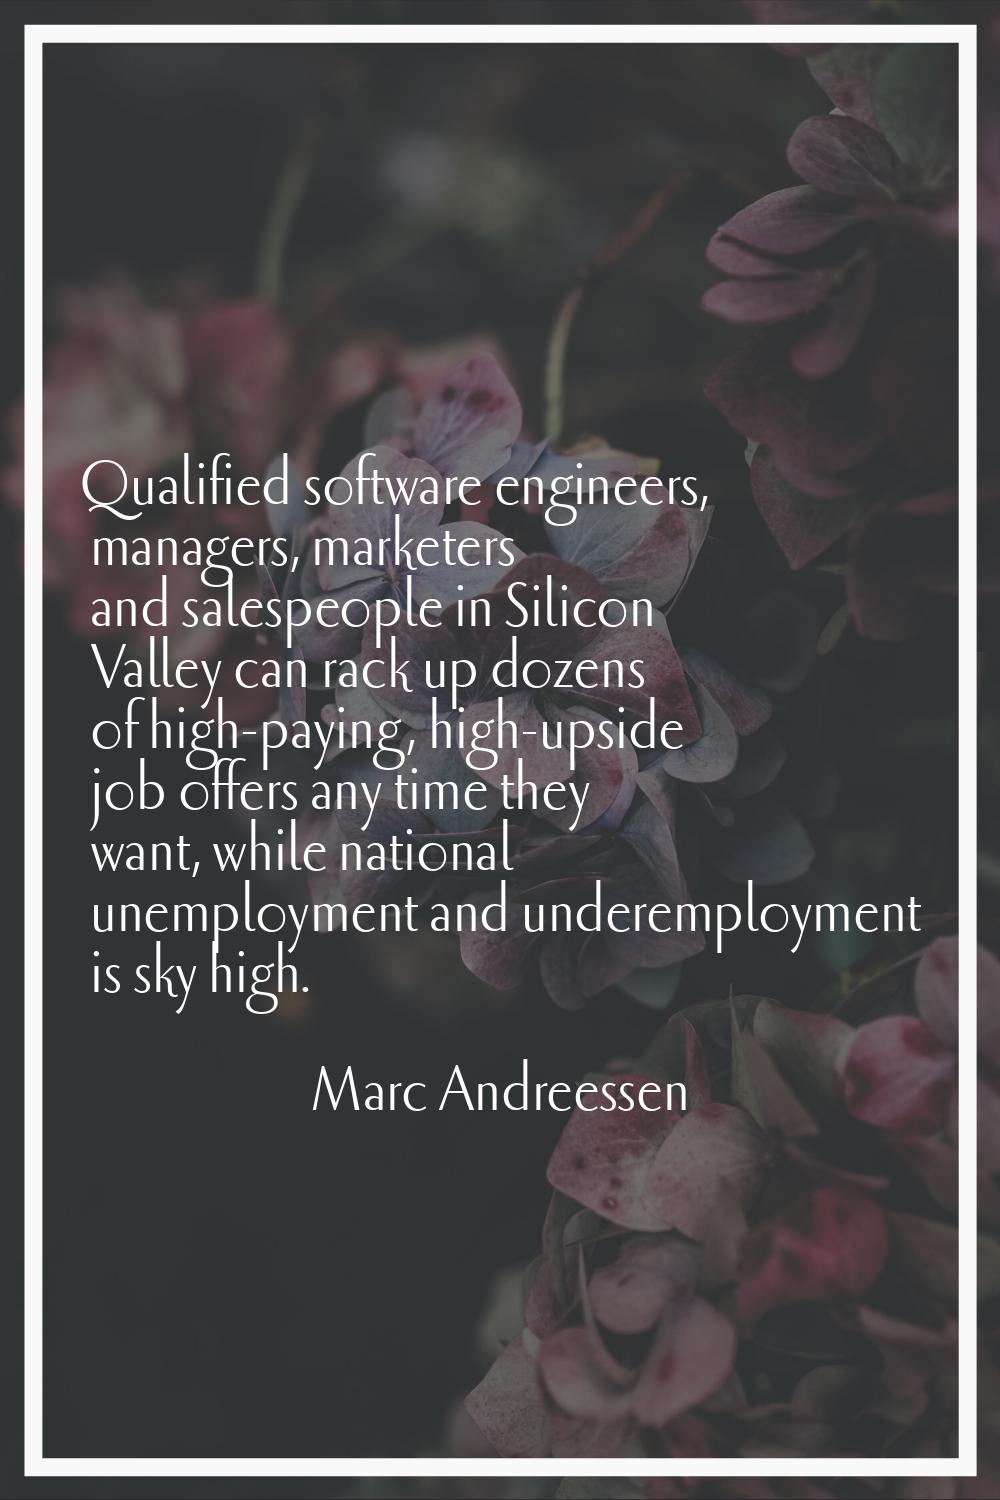 Qualified software engineers, managers, marketers and salespeople in Silicon Valley can rack up doz